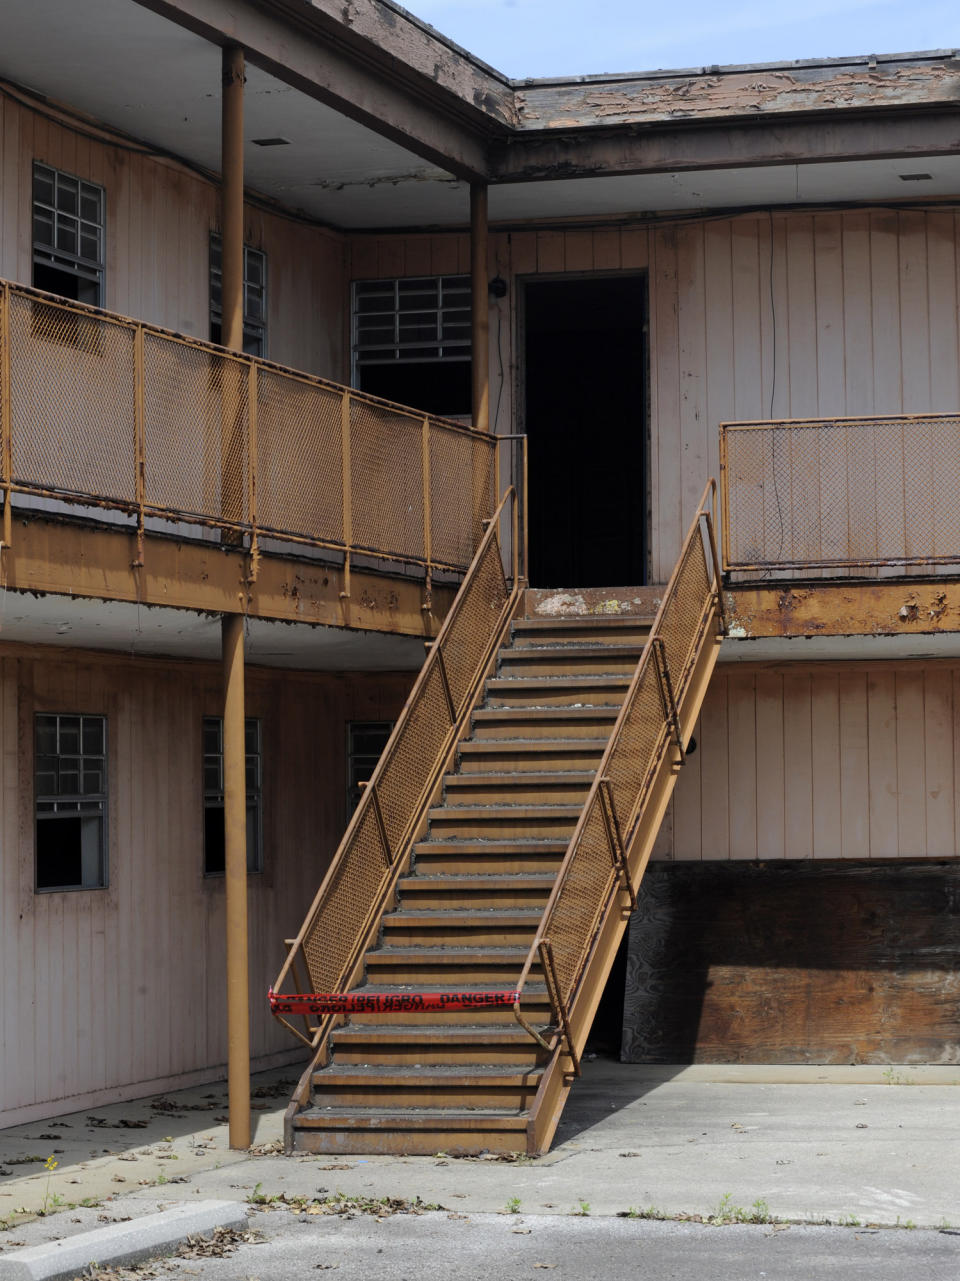 A rusty stairway stands at the historic A.G. Gaston Motel during renovation work in Birmingham, Ala., on Wednesday, April 17, 2019. Once featured in the "The Negro Motorist Green Book," the long-closed motel provided a home for Martin Luther King Jr. during civil rights demonstrations in the 1960s. It is is being transformed into the centerpiece of a new national civil rights monument. (AP Photo/Jay Reeves)